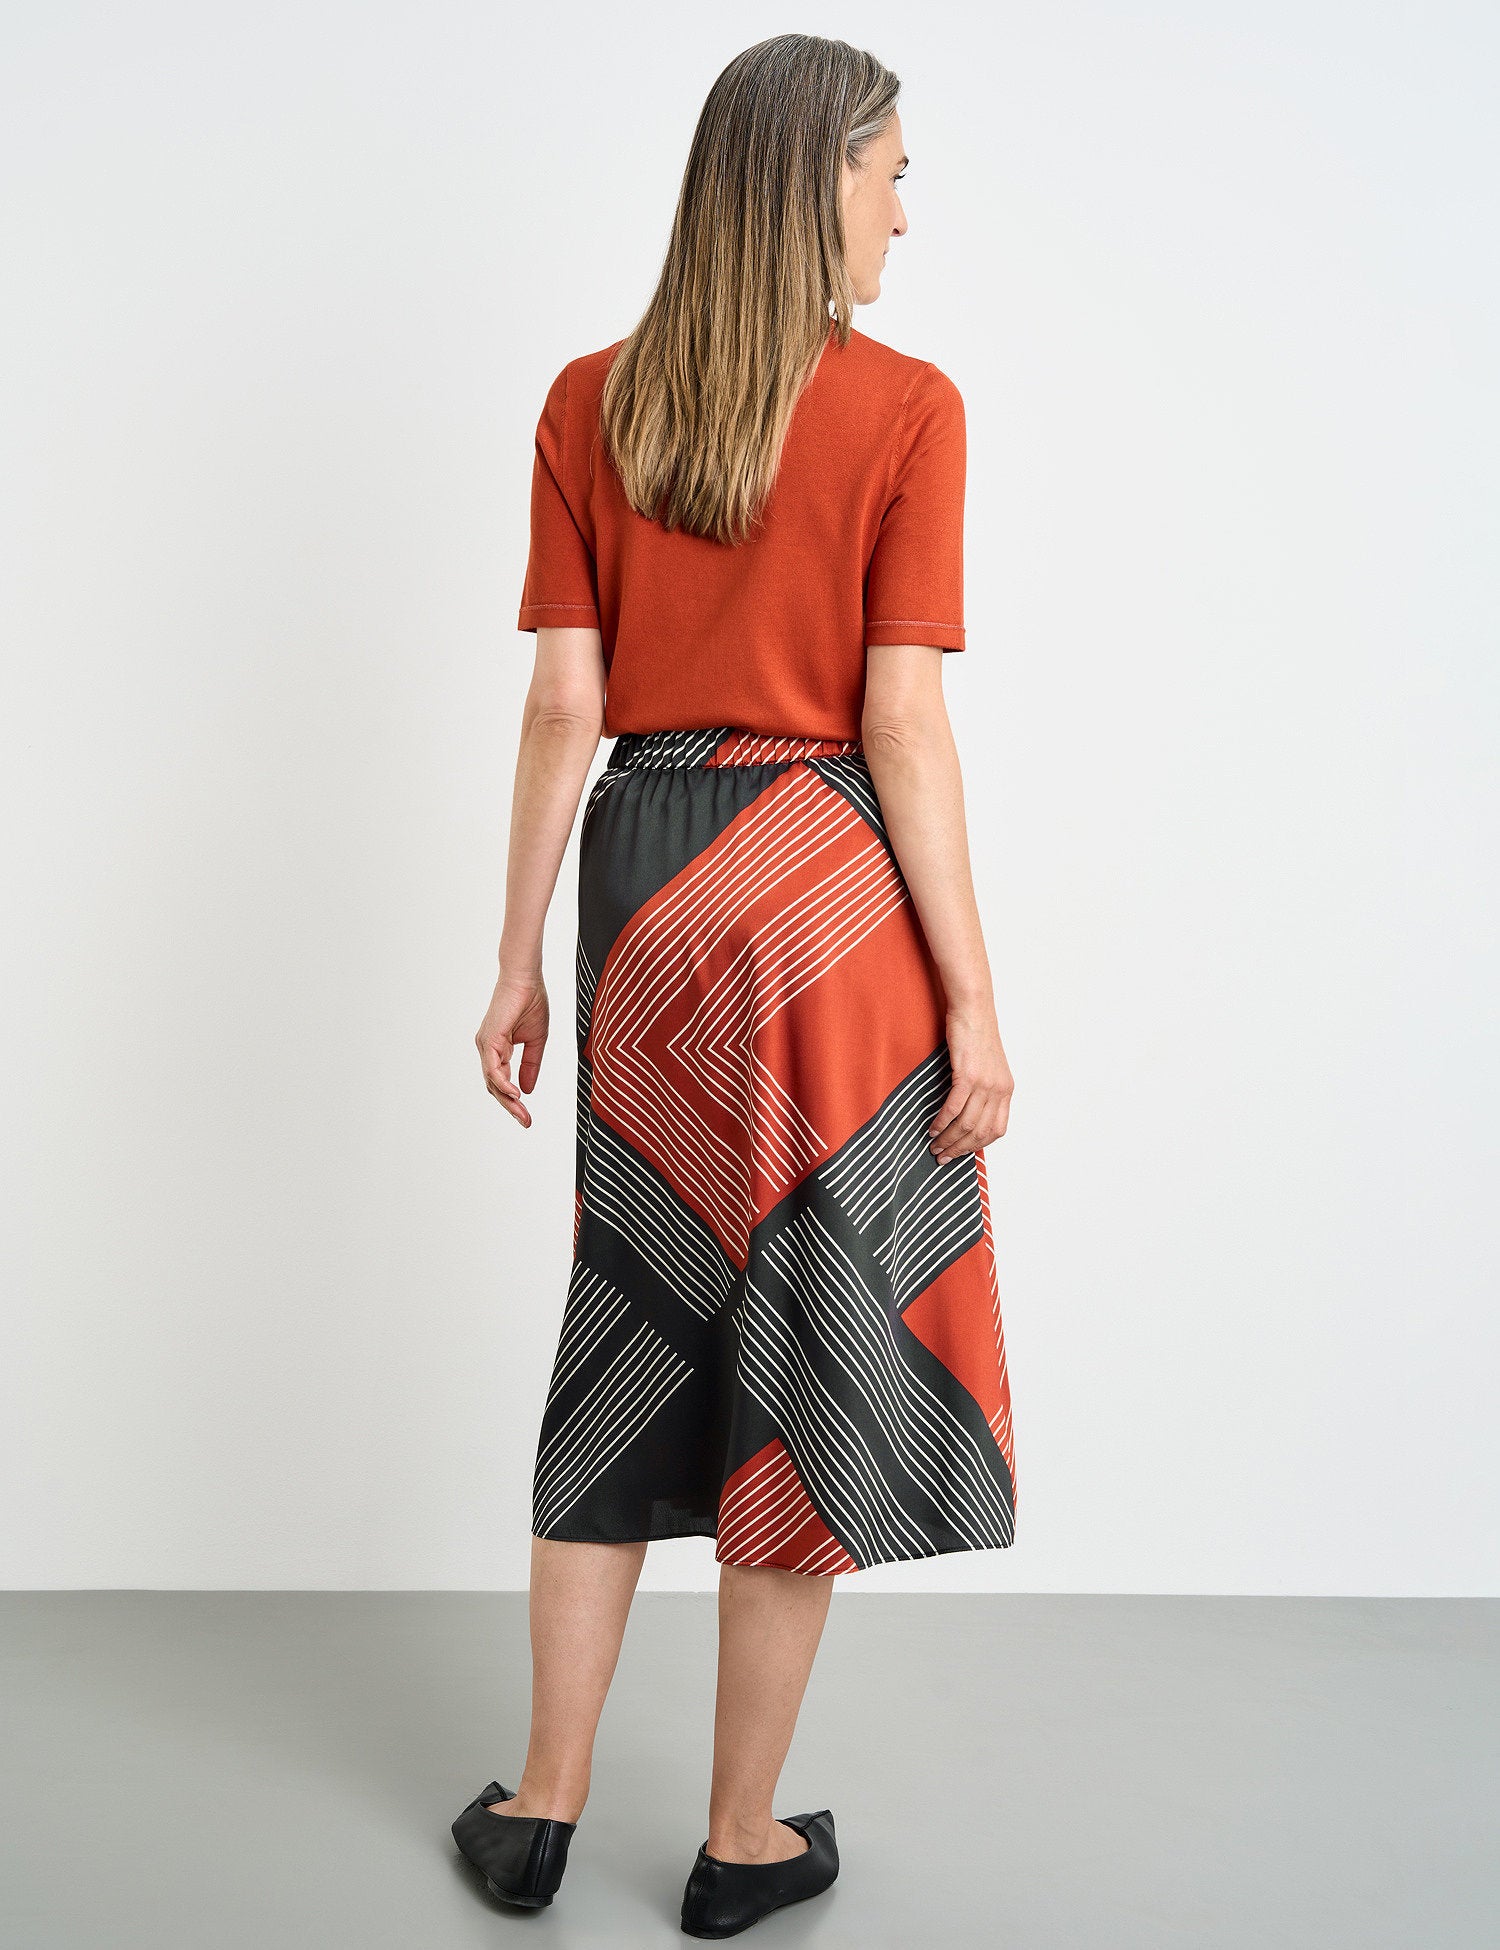 Midi Skirt With Pleated Detail_210016-31515_2070_06